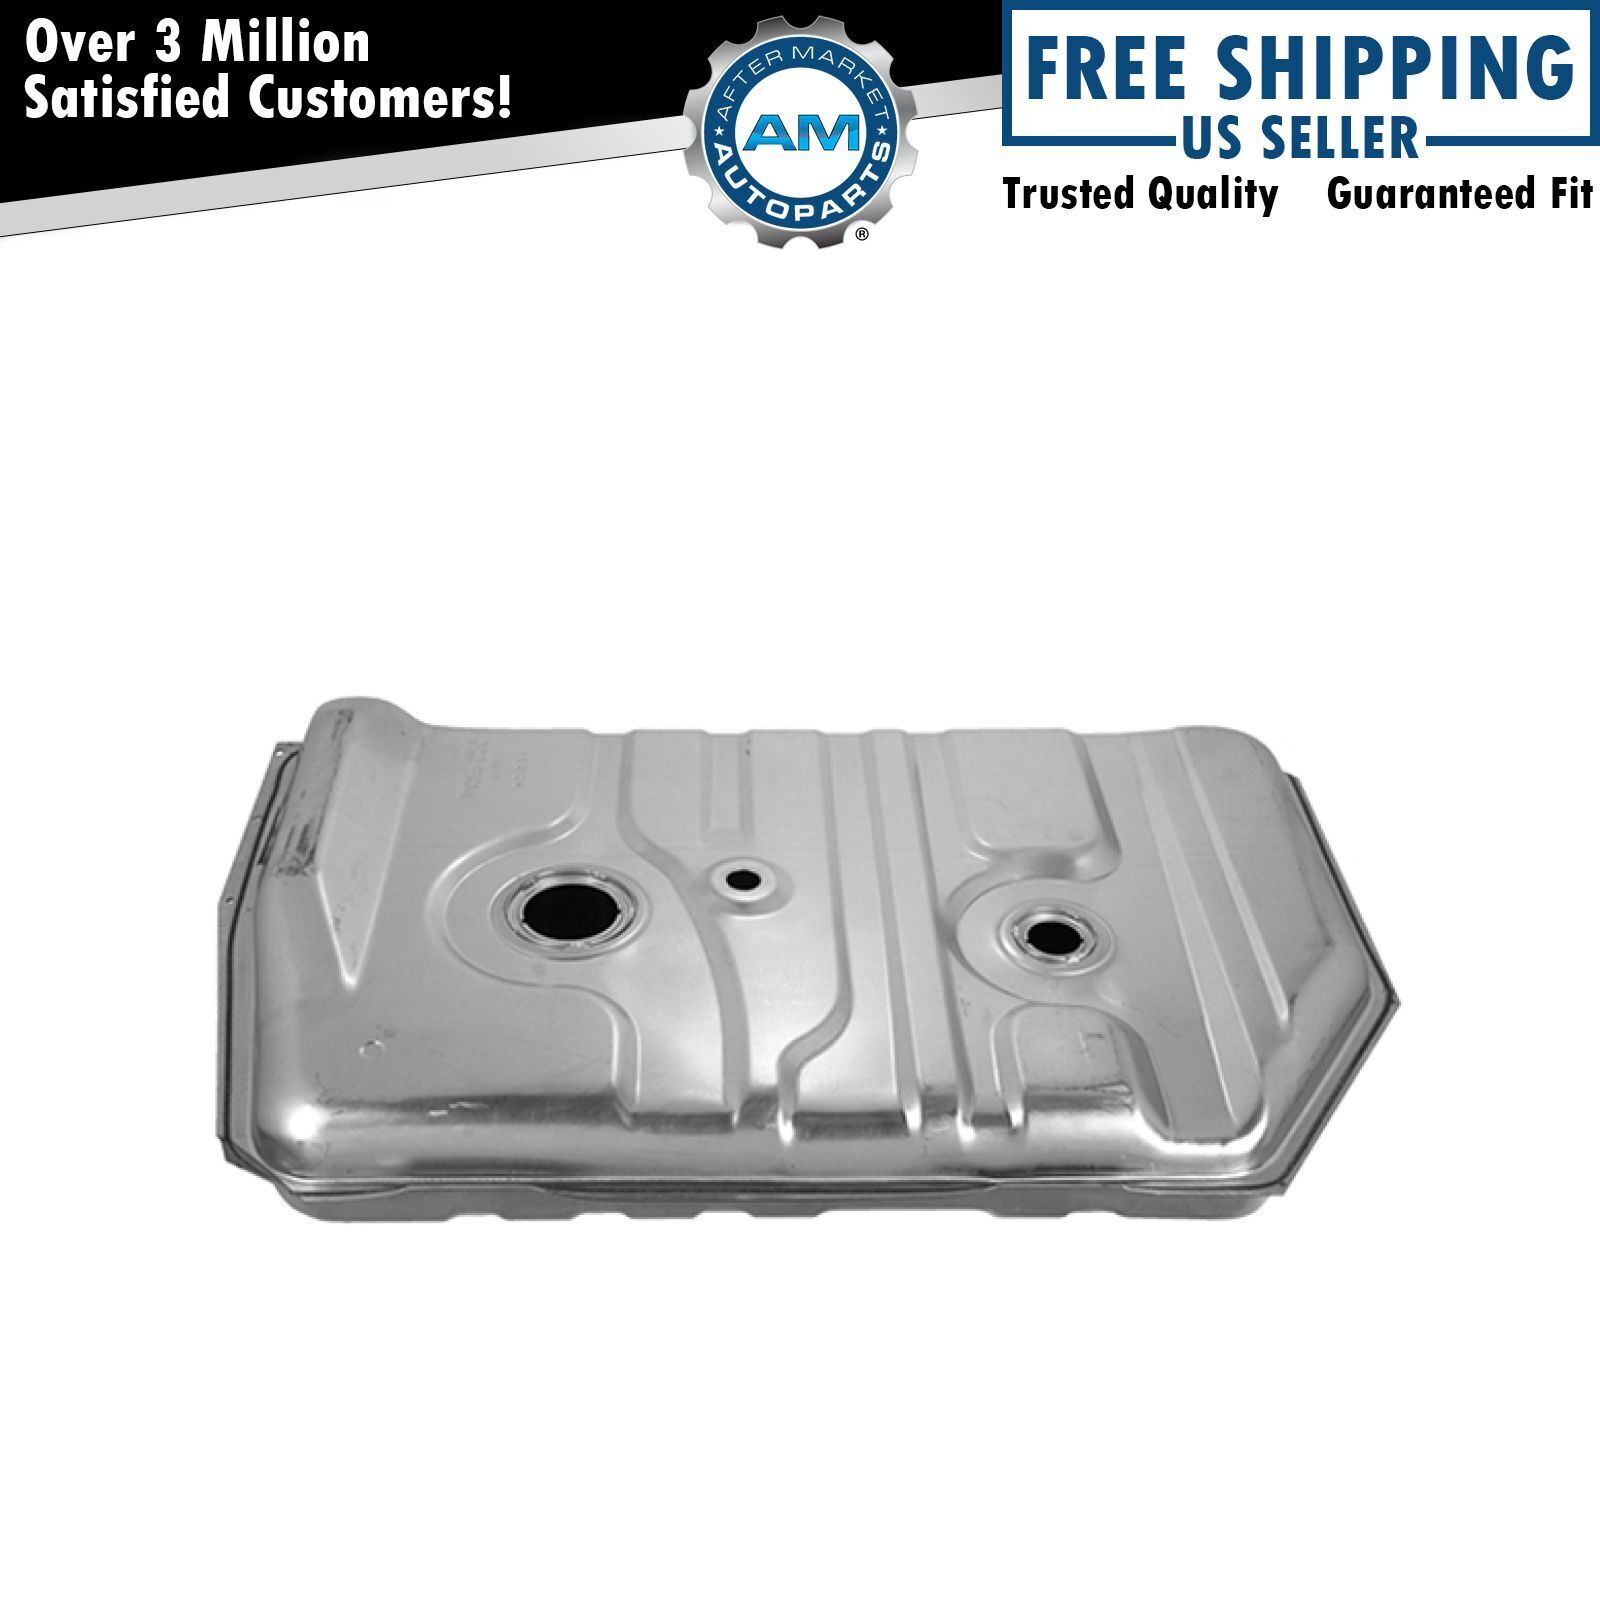 22 Gallon Gas Fuel Tank for Mercury Cougar Ford Lincoln New